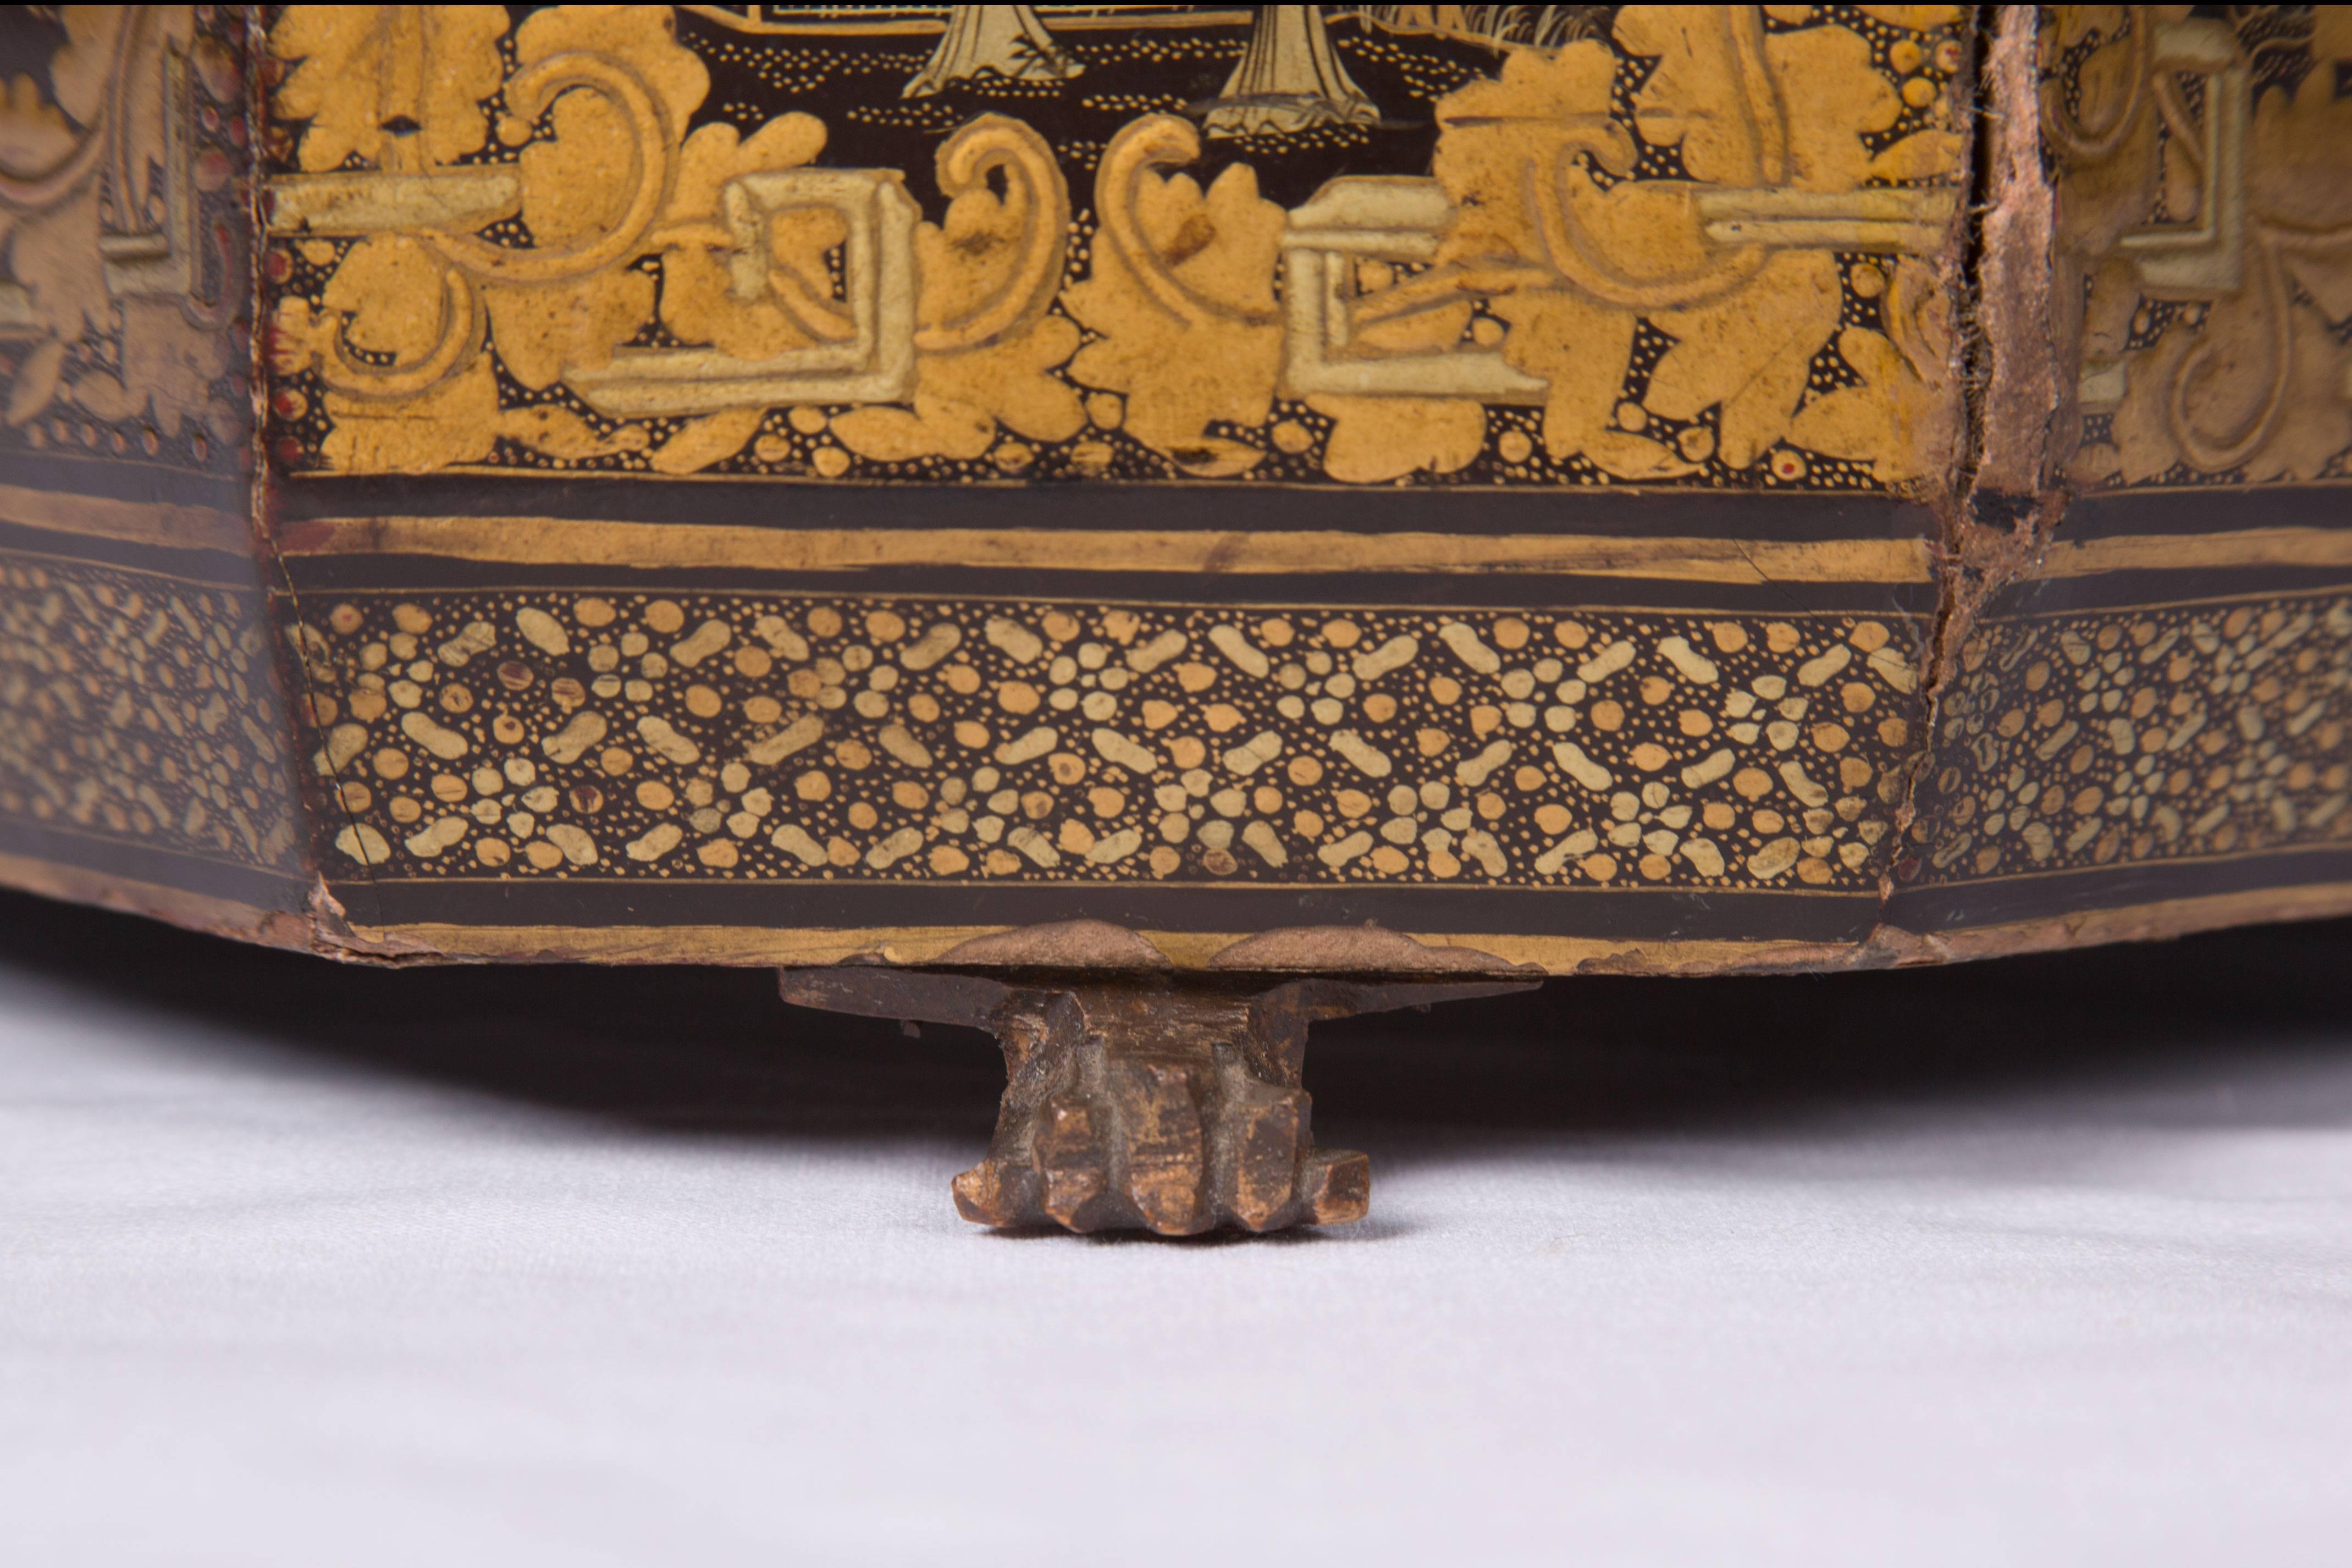 Pictured is an elegant Chinese black lacquered box decorated with finely detailed gilt chinoiserie scenes framed by floral borders. The box is raised on paw feet, late 19th century.